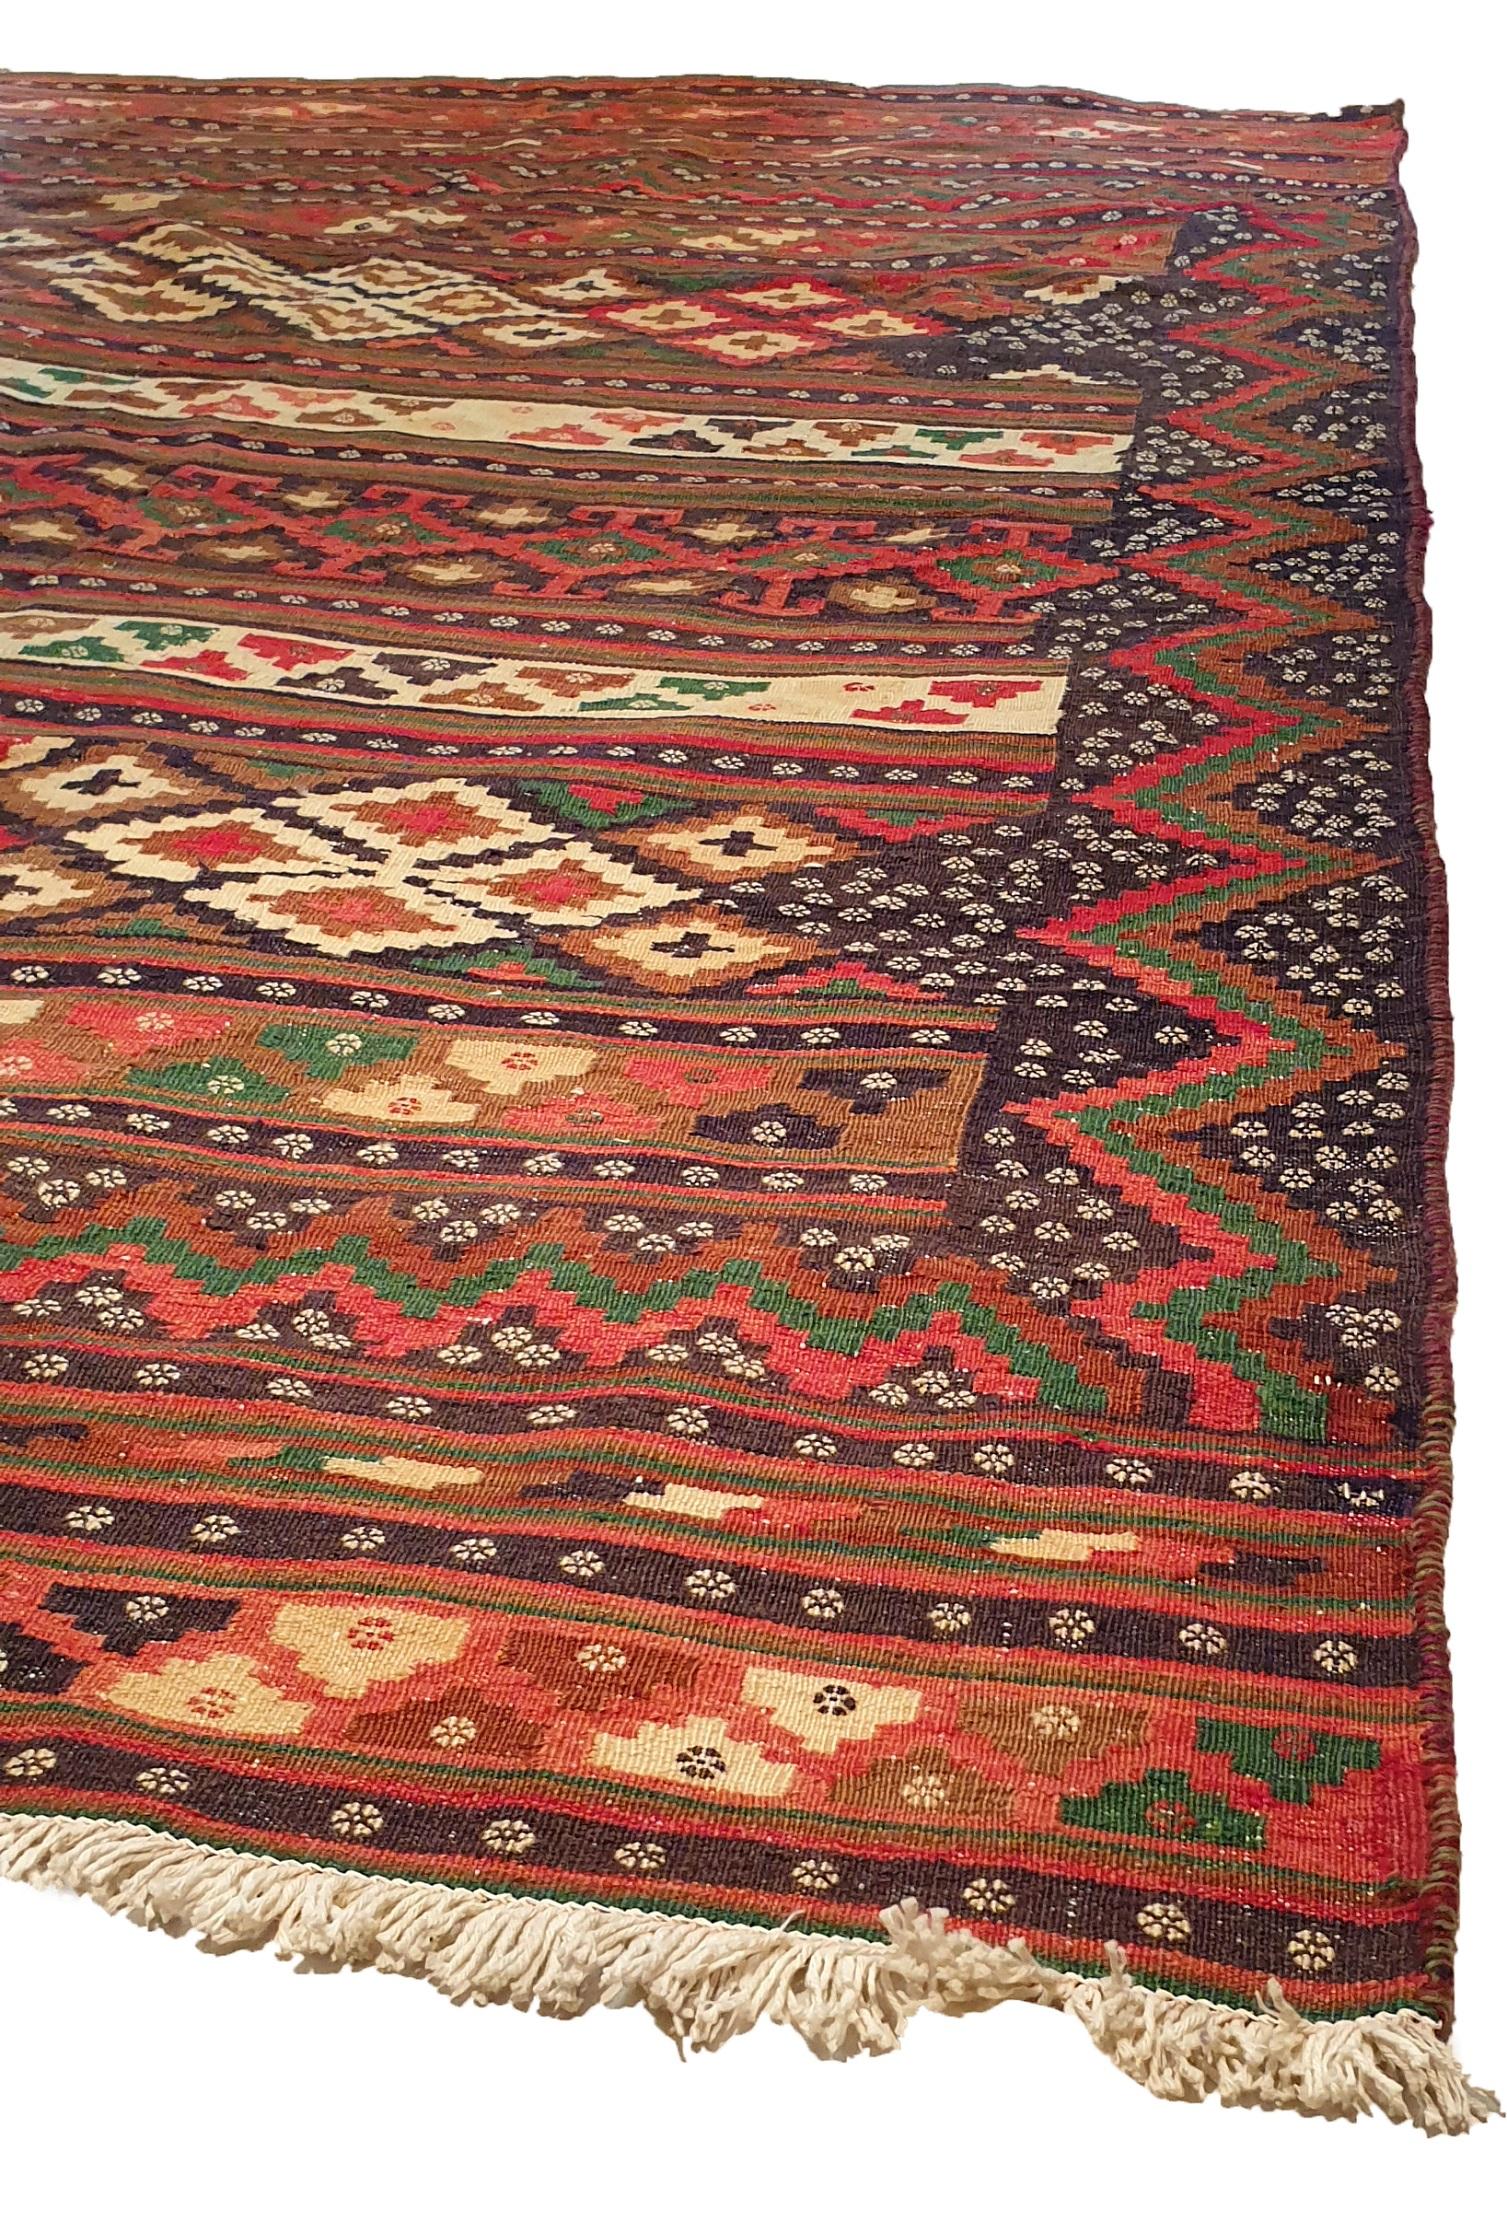 750 - Nice 20th century Kilim with beautiful pattern, and beautiful colors pink, orange, yellow, green and dark brown, entirely hand-woven with wool woven on cotton foundation.